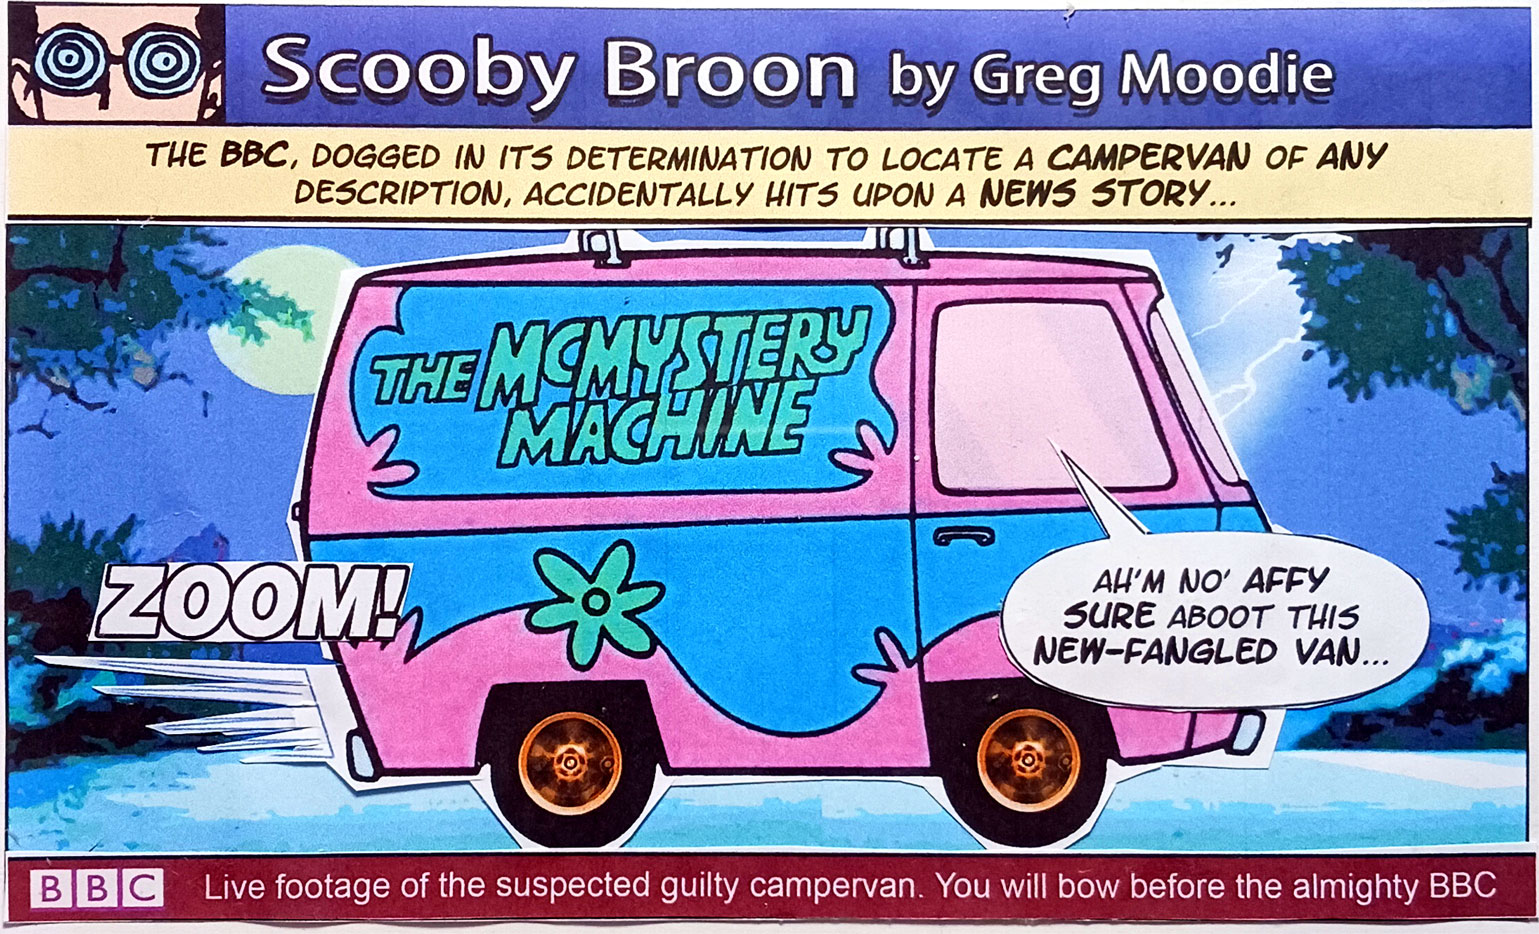 Scooby Broon